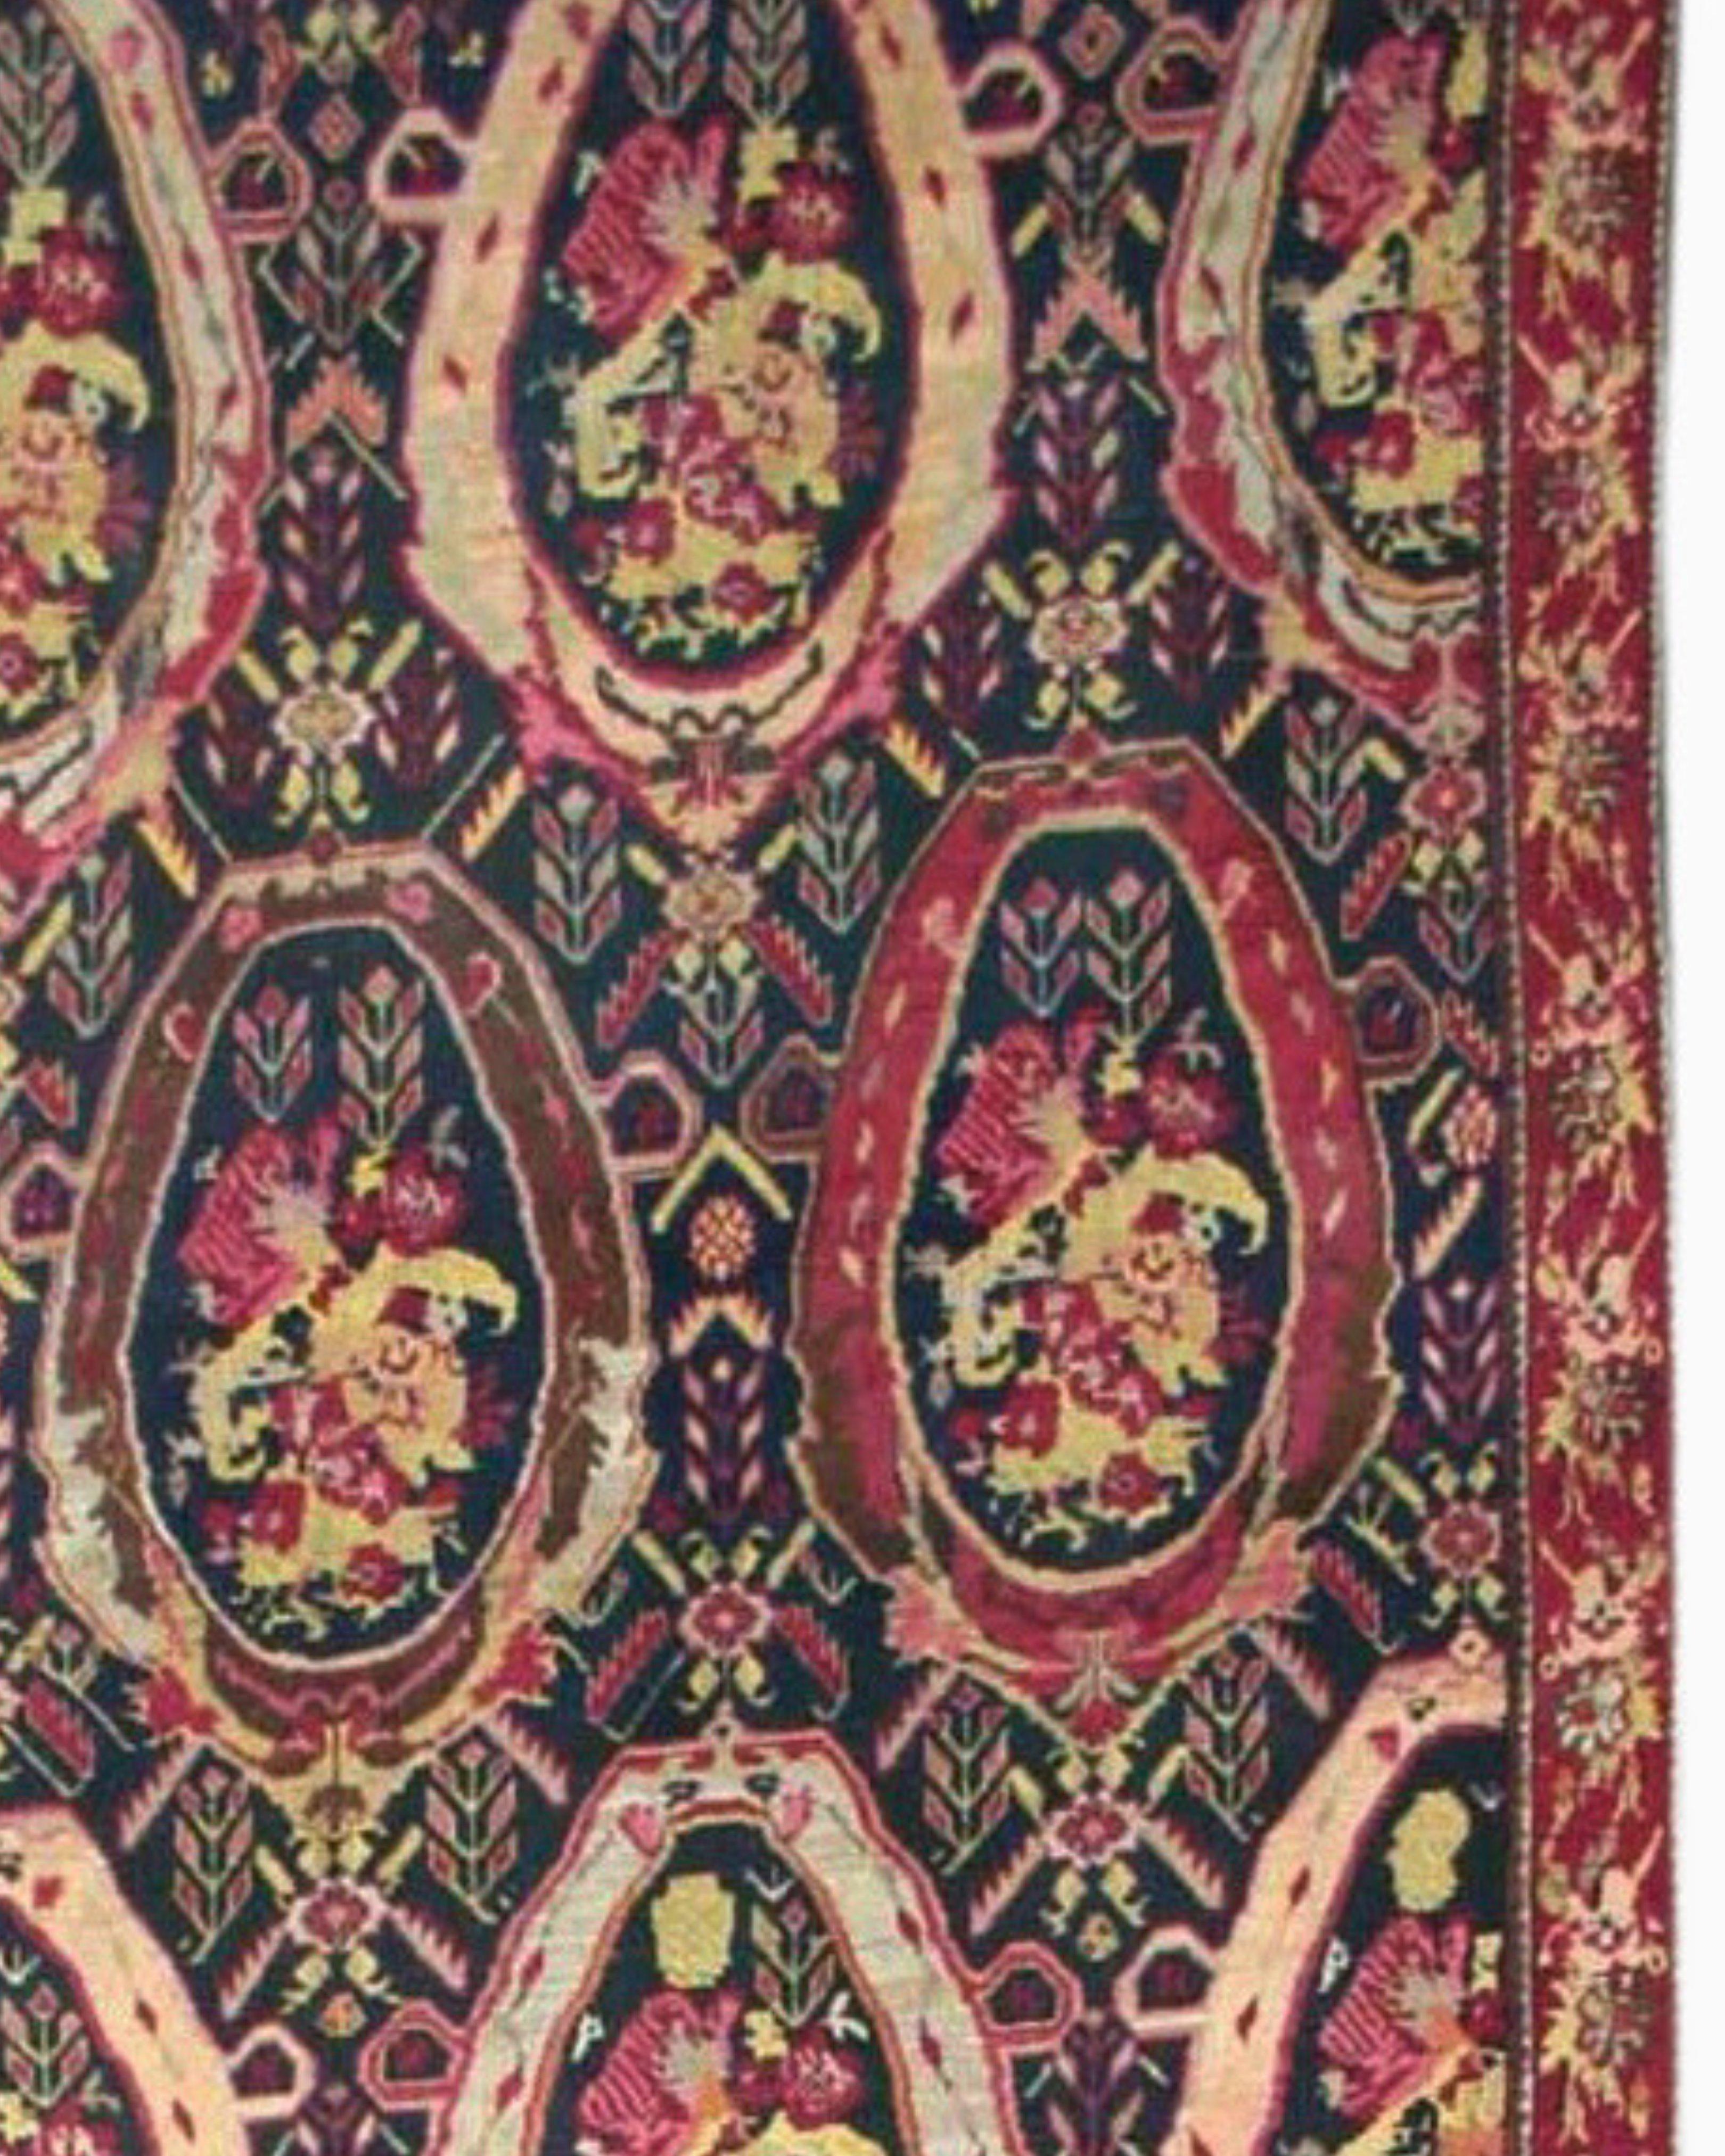 Antique Large Oversized Karabagh Rug, Late 19th Century 

This long oversized Karabagh carpet demonstrates the fascination in the Near East with French design in the late 19th century. Here, a Caucasian weaver has rendered a repeat design of